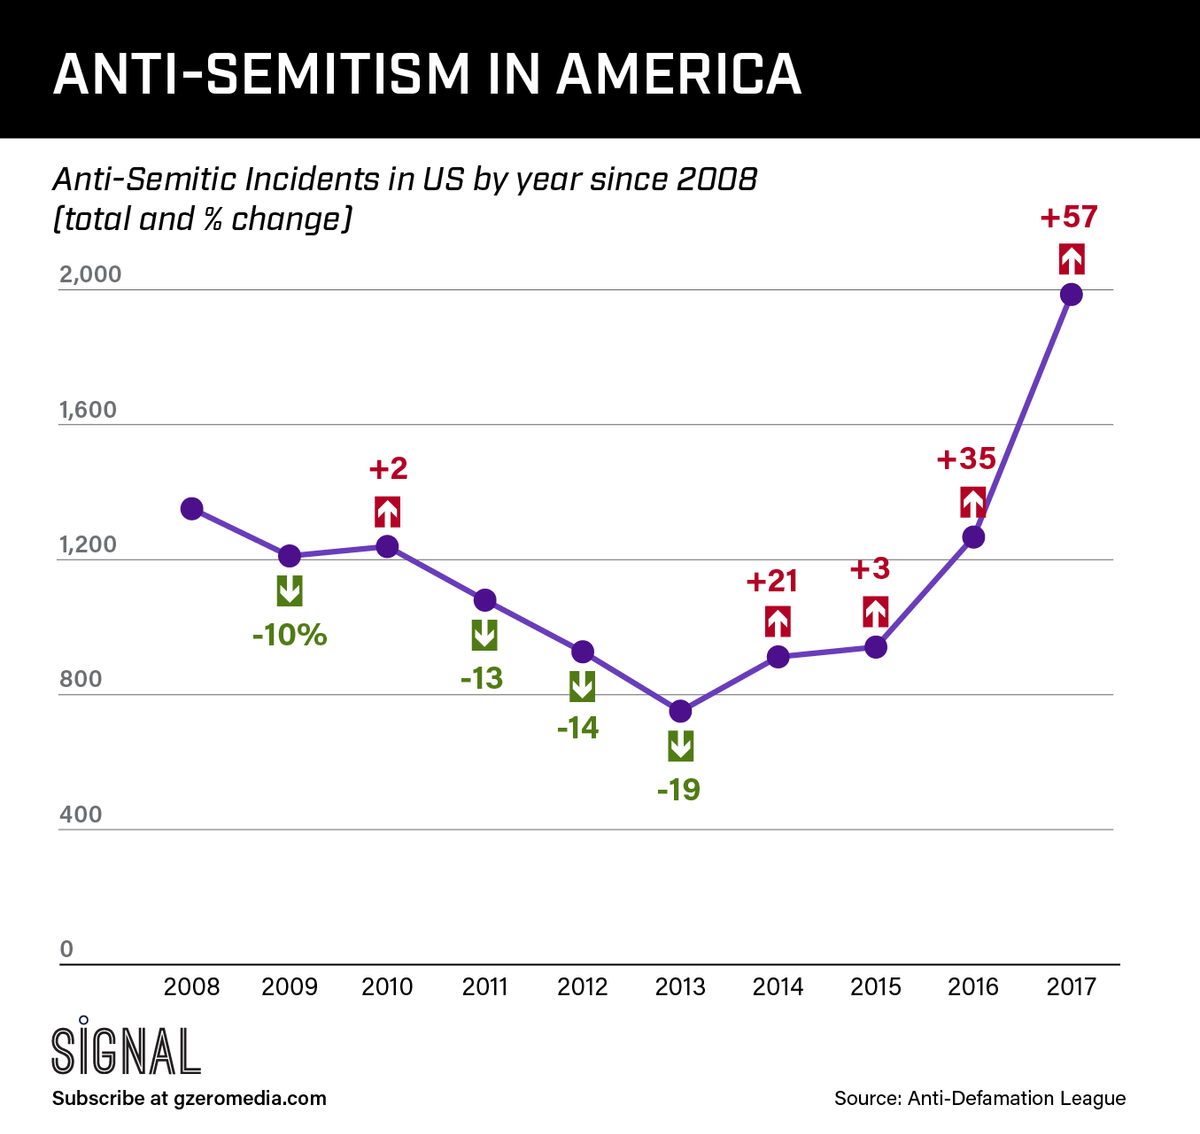 THE GRAPHIC TRUTH: ANTI-SEMITISM IN THE UNITED STATES